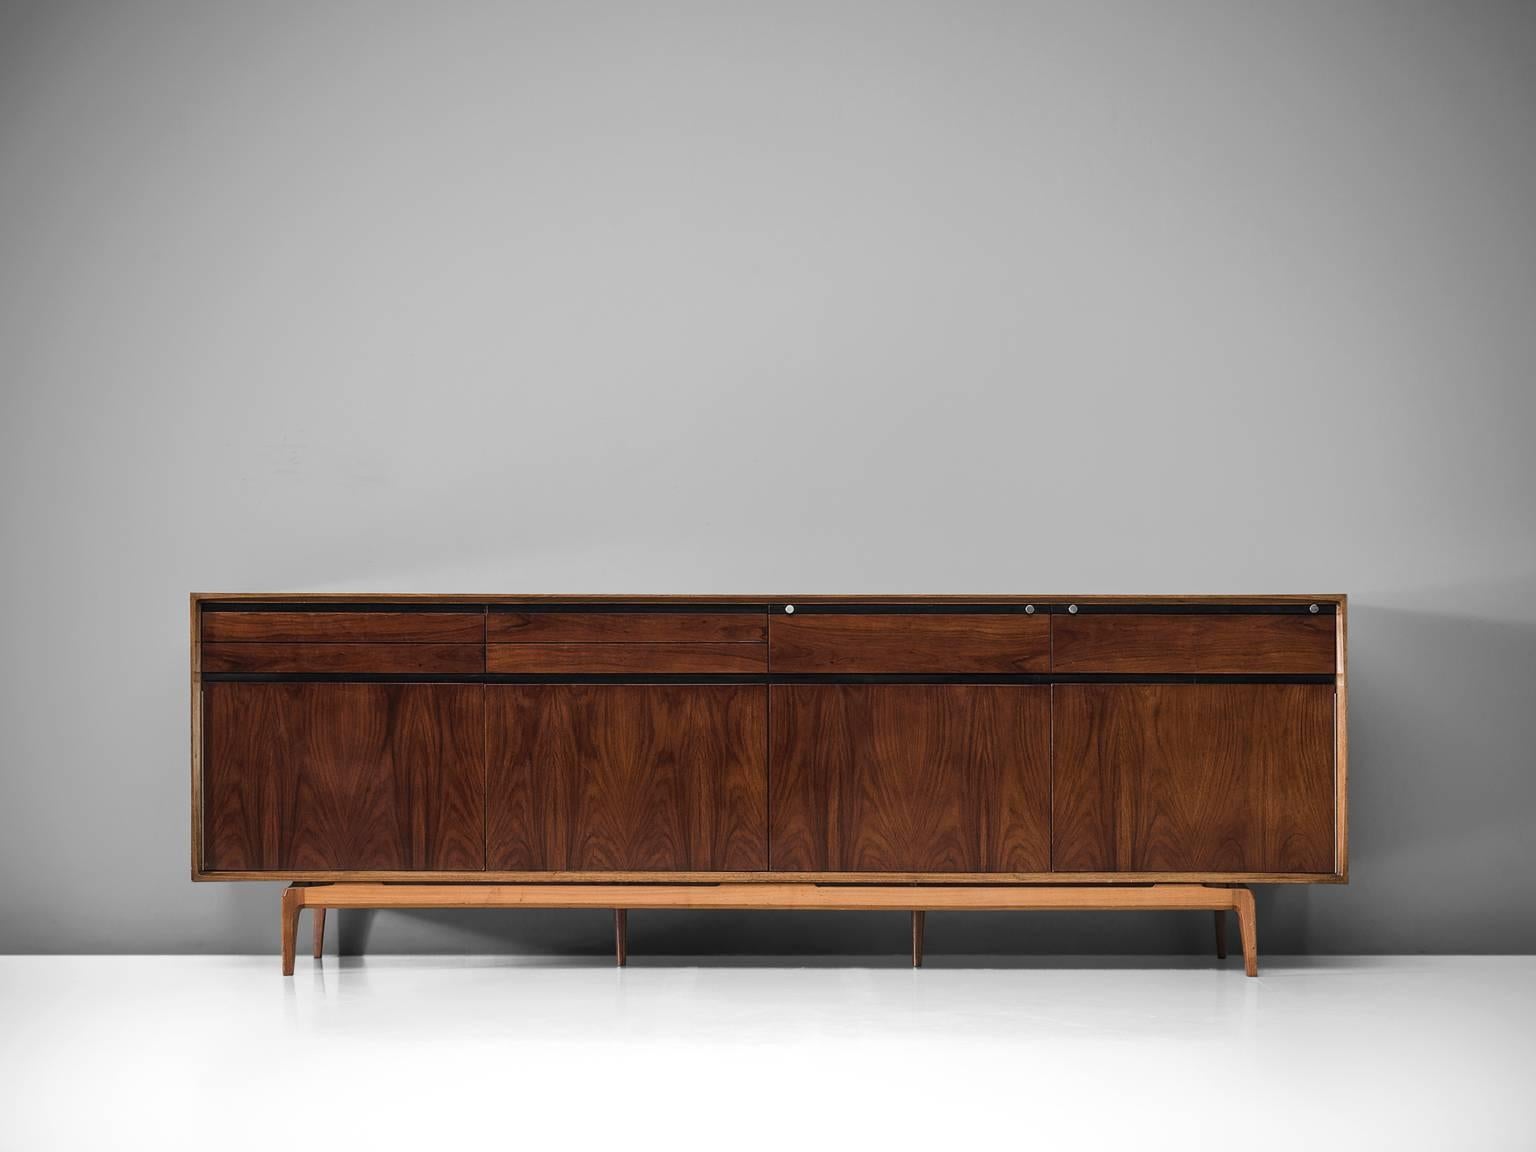 De Coene, sideboard, rosewood and walnut, Belgium, 1958.

This sideboard is well-constructed and detailed in a discrete manner. Produced in rosewood and walnut. The piece shows well-designed lines and interesting details, such as the folding